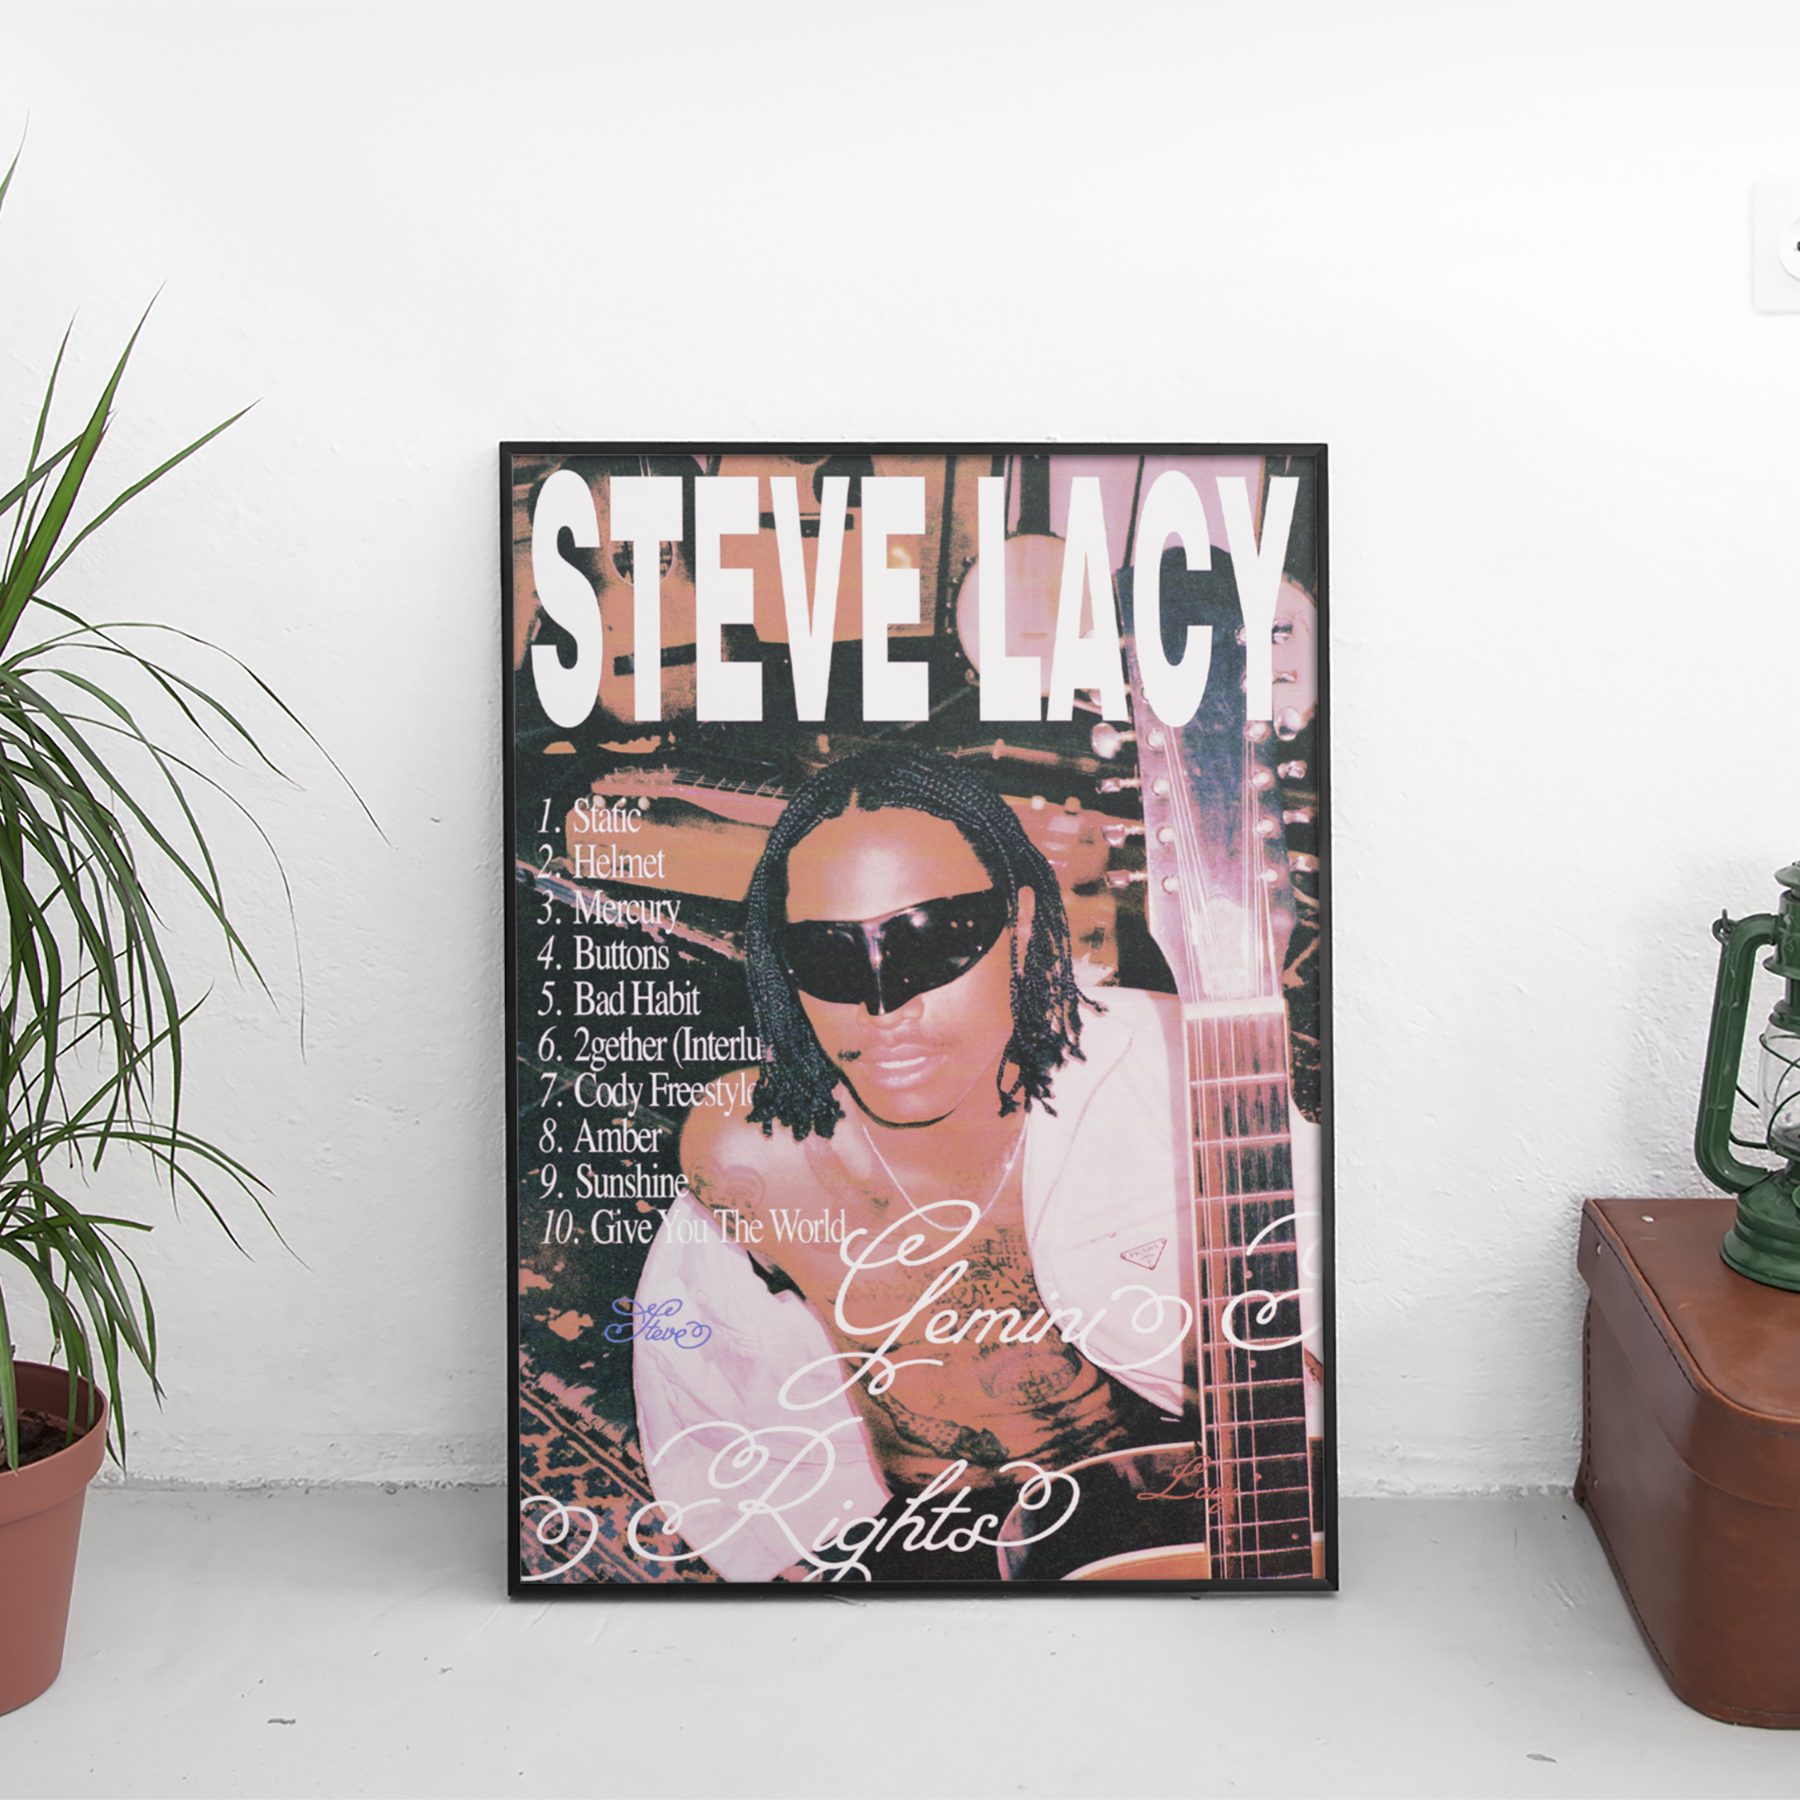 Gemini Rights - Steve Lacy Tracklist Poster